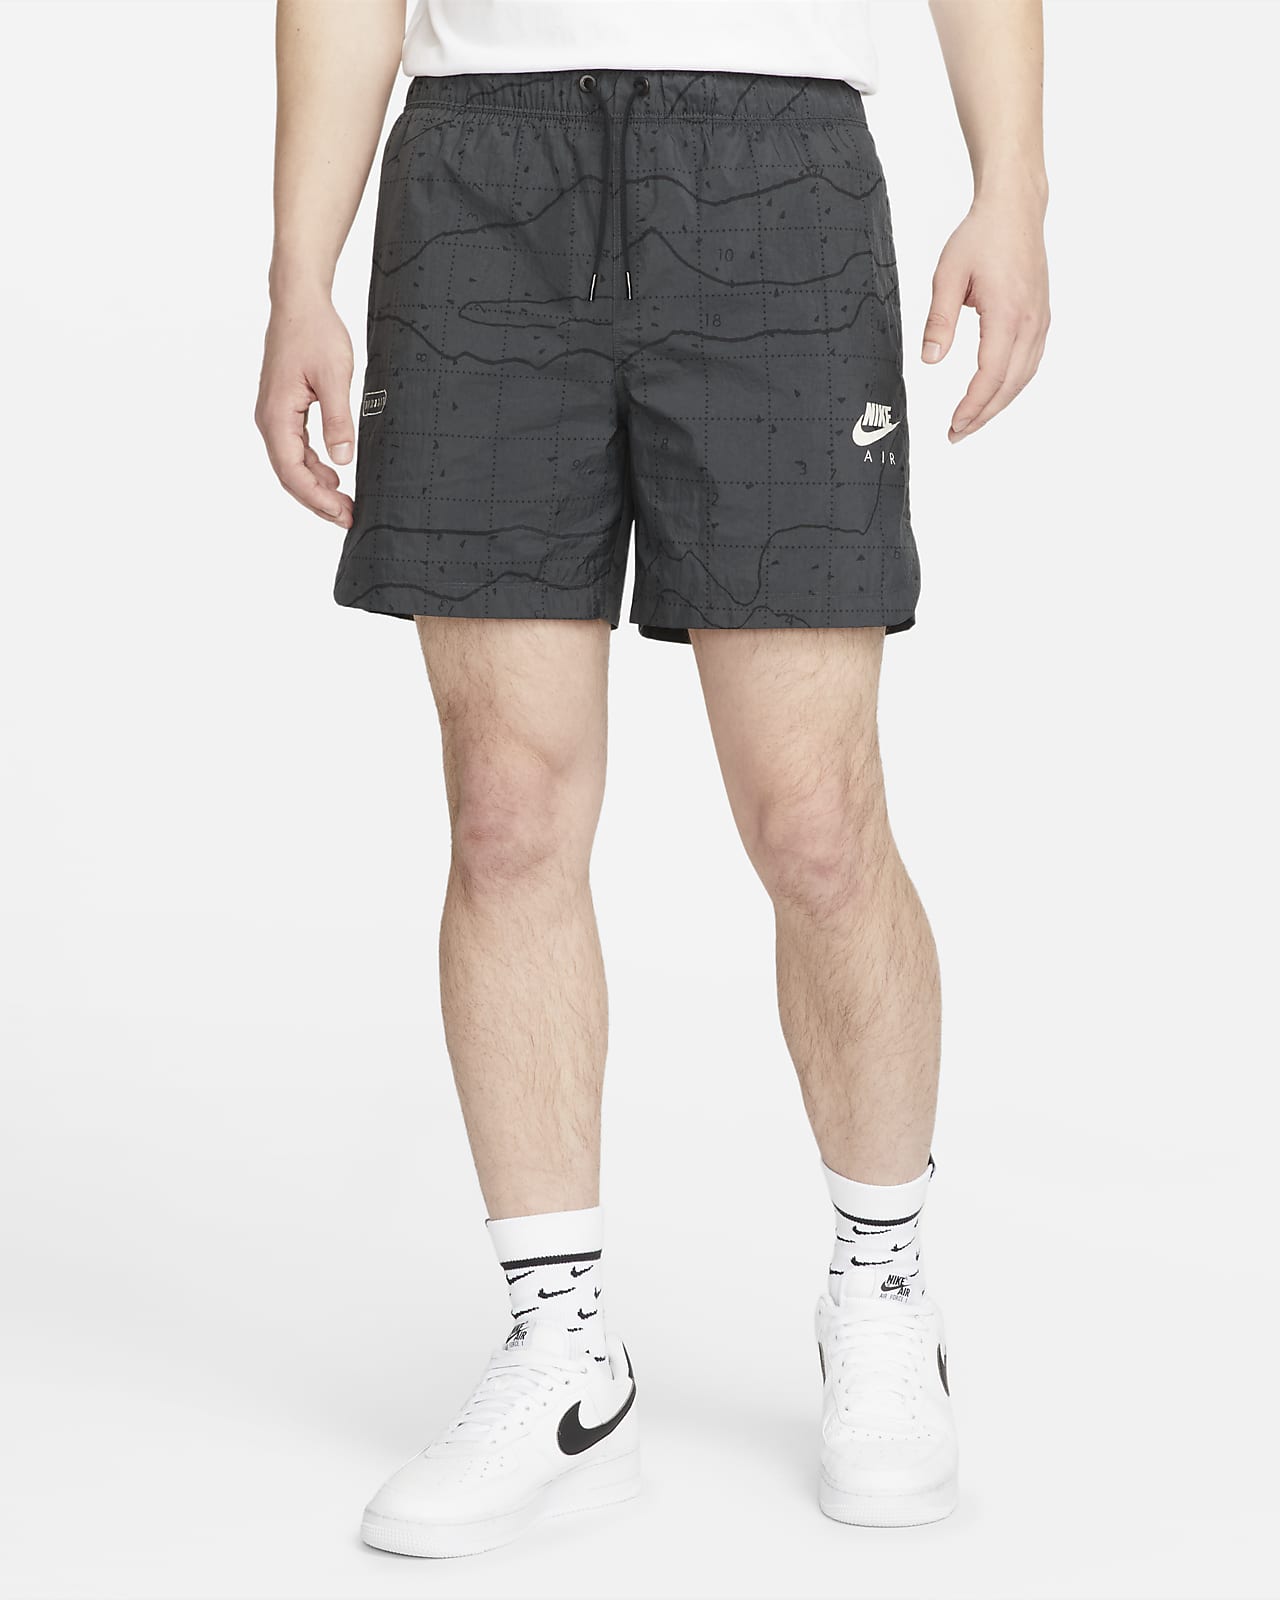 Lach Opname Begrip Nike Air Men's Lined Woven Shorts. Nike ID